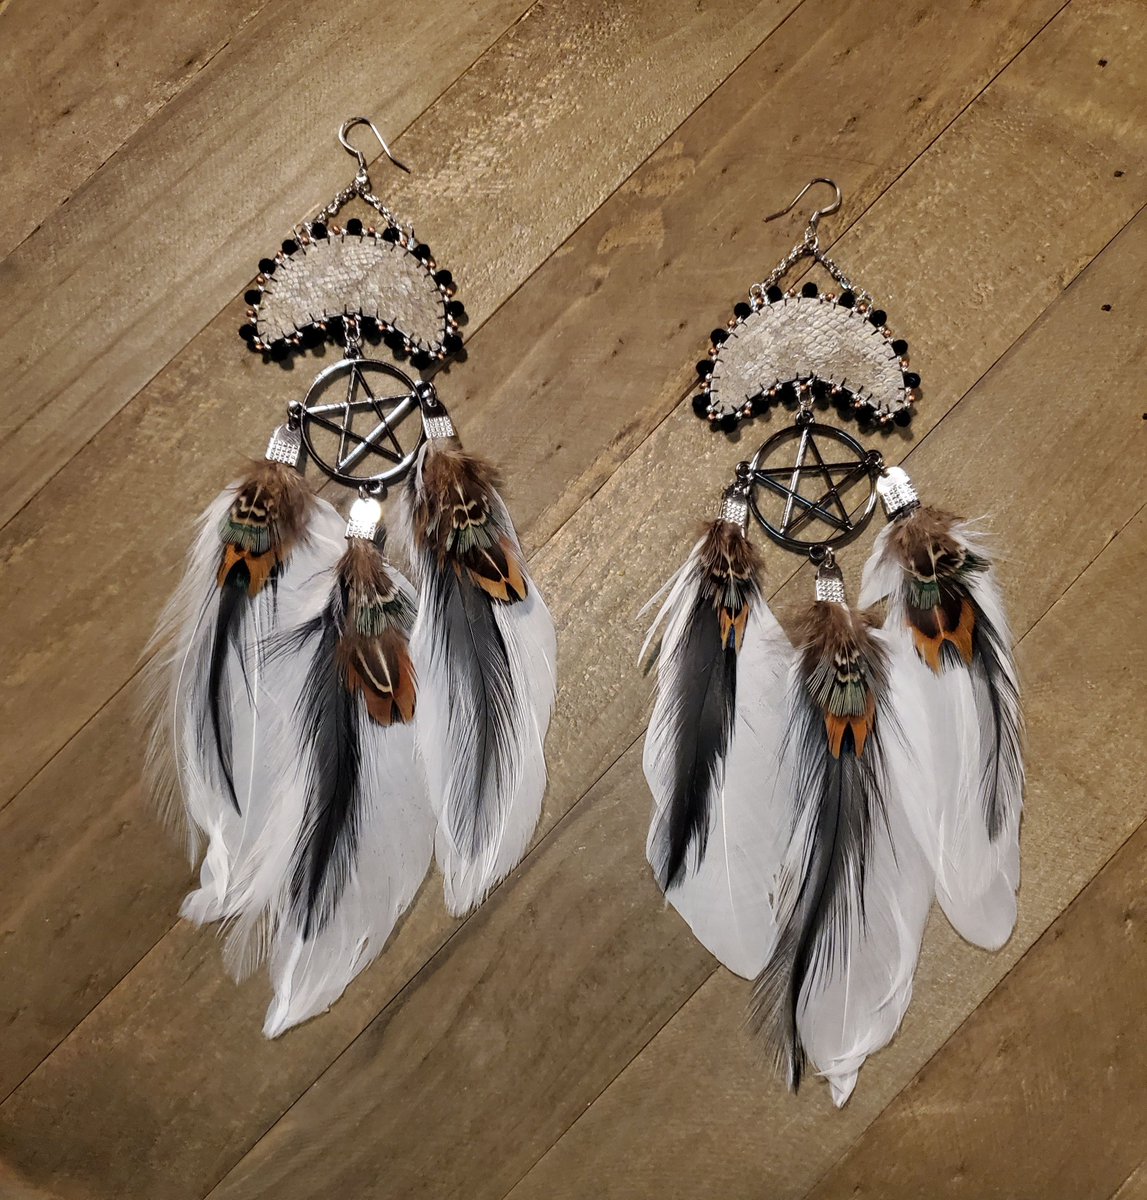 Salmon skin moon, pentacles, and feathers beaded earrings, available in my Big Cartel store @ lovealaskadesign.bigcartel.com, kukwstumckacw- thank you for looking! #NativeTwitter #beadwork #GothTwitter #PaganTwitter #NativeMade #BeadedEarrings